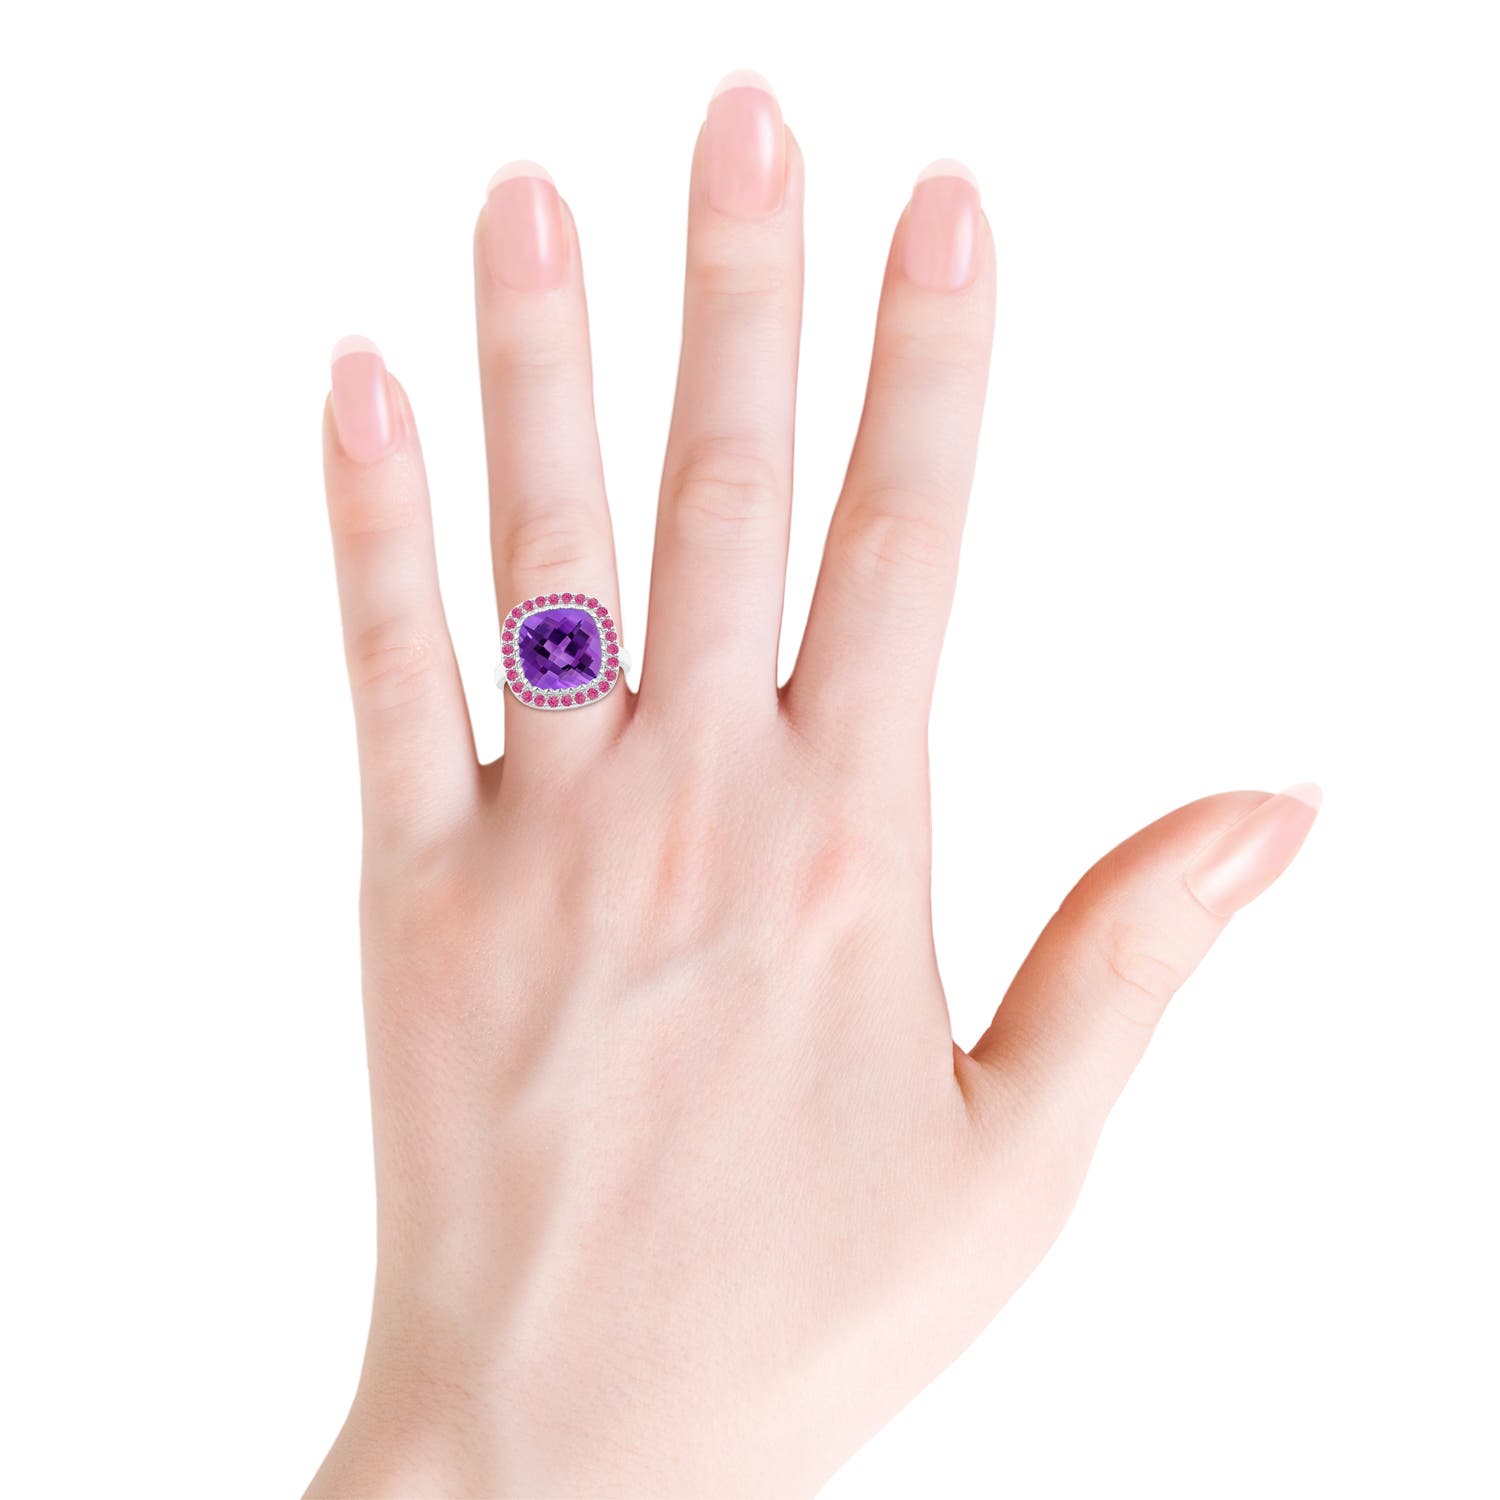 AAA - Amethyst / 5.4 CT / 14 KT White Gold